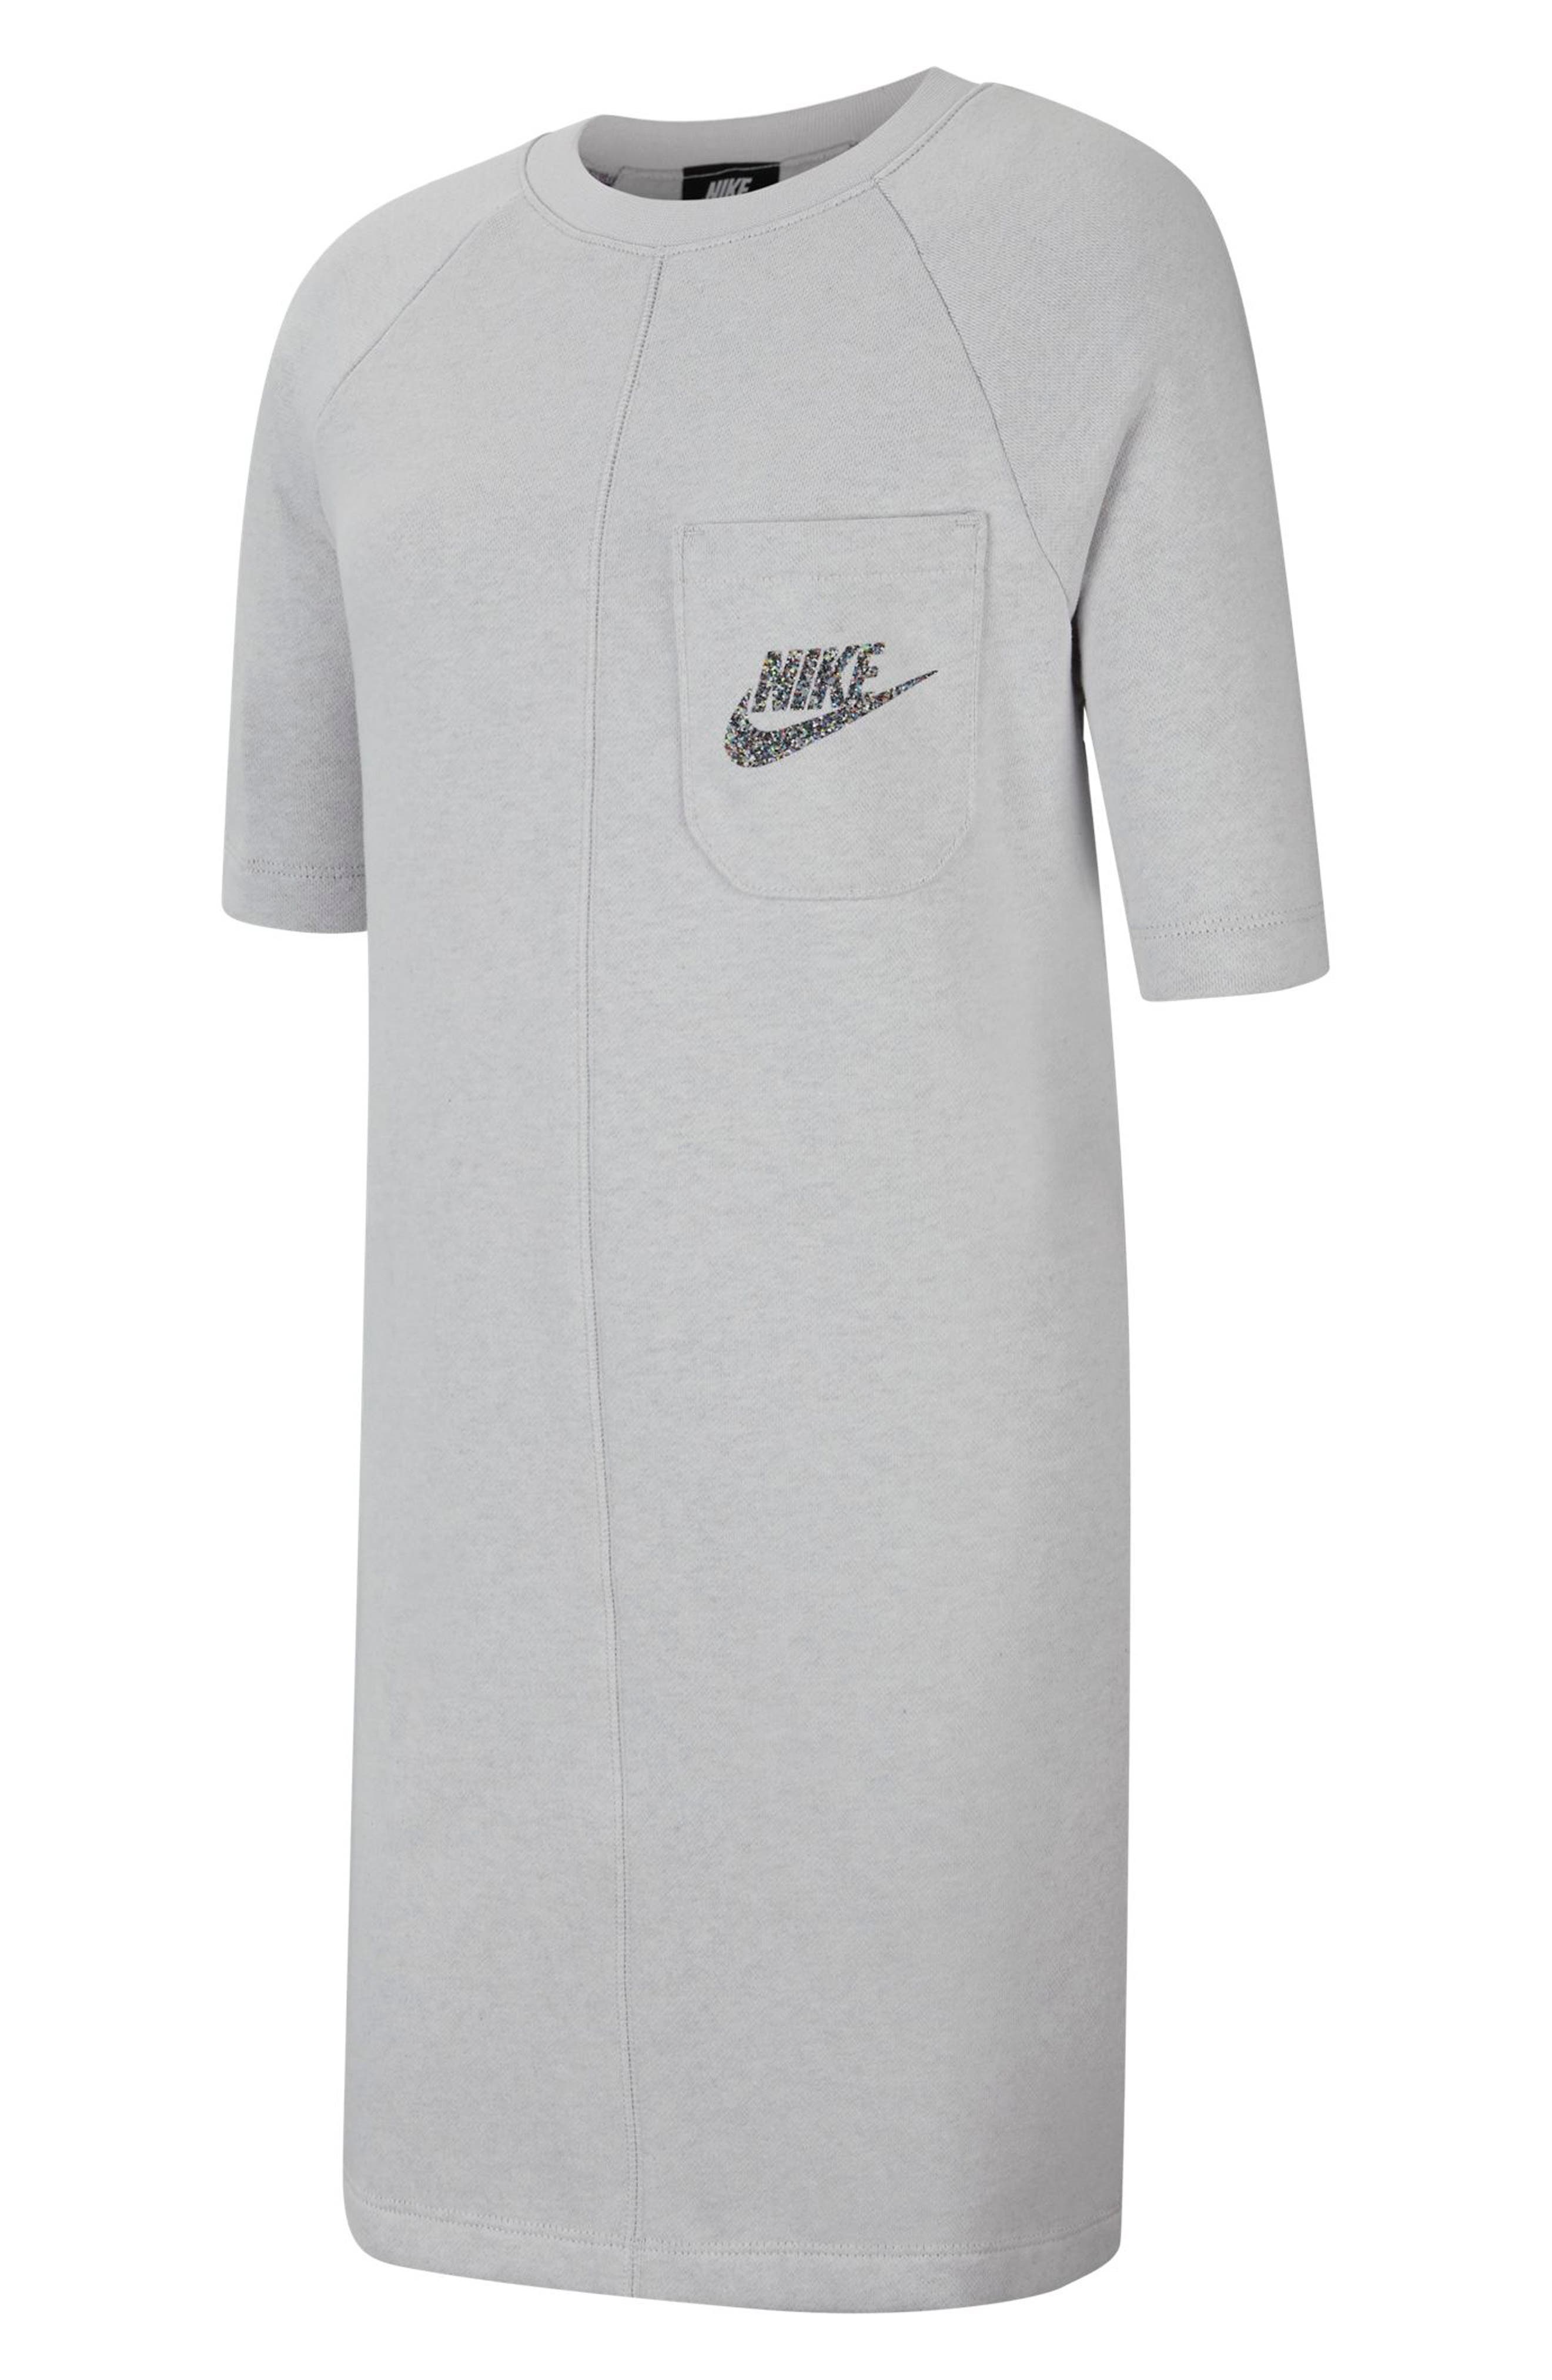 nike girls clothes